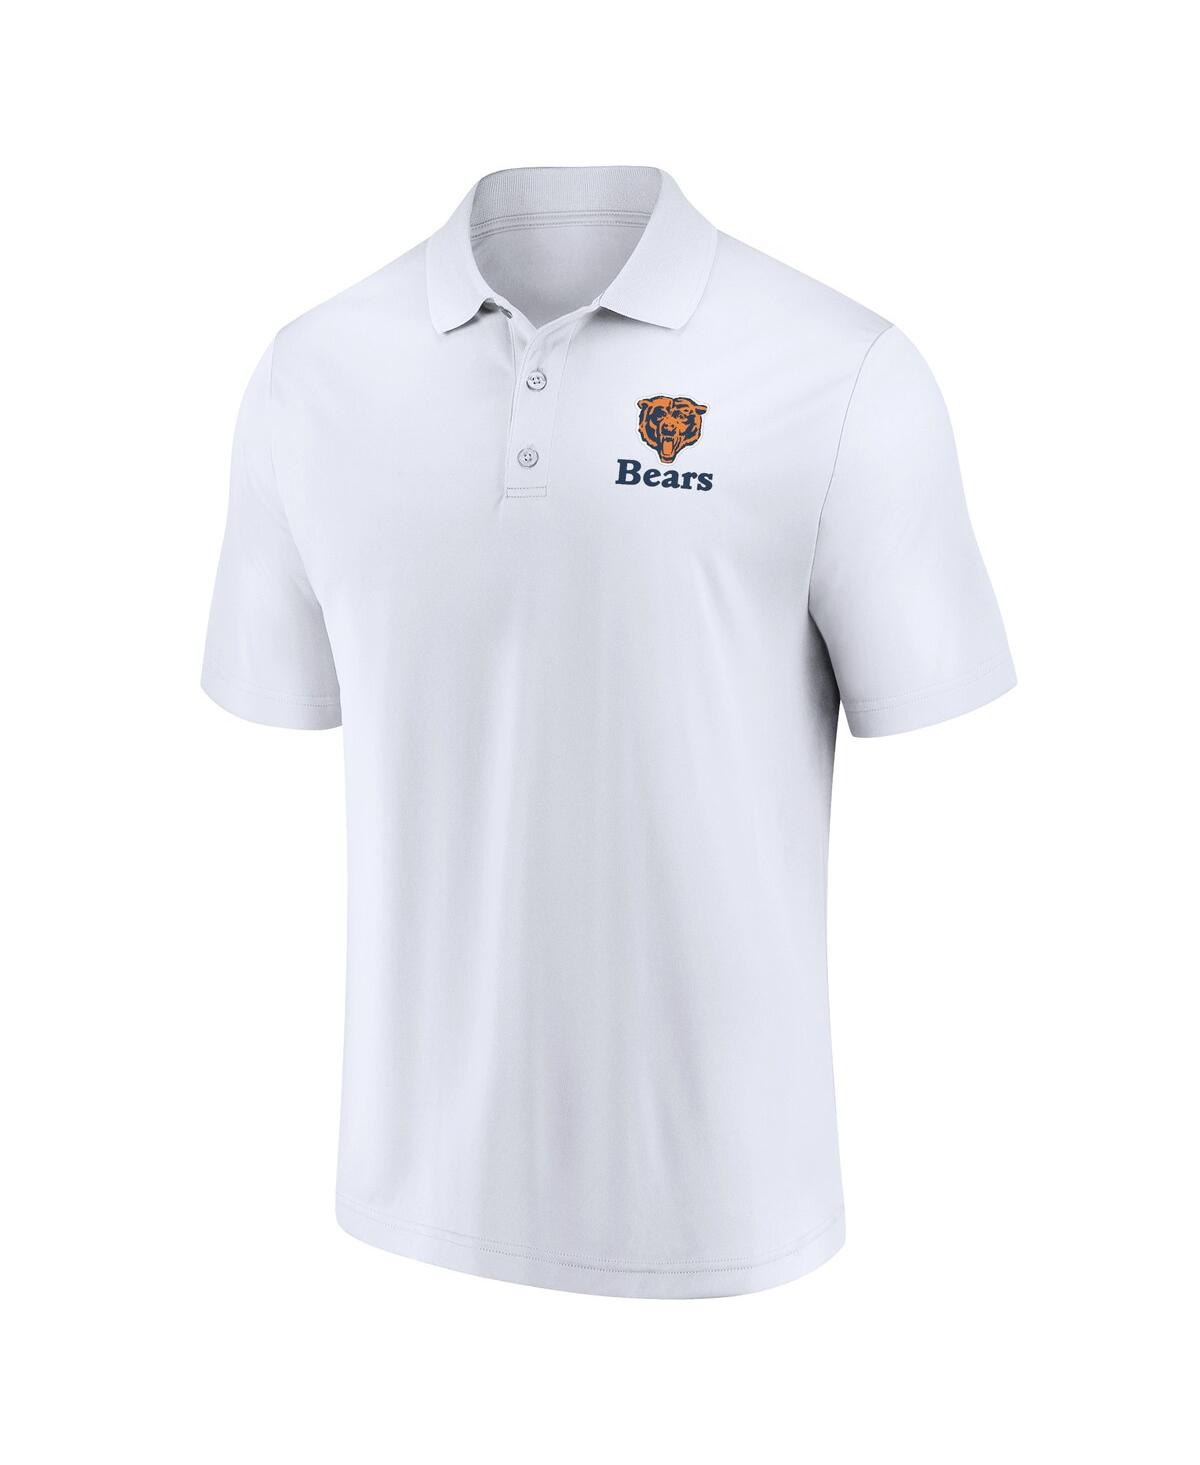 Shop Fanatics Men's  White, Navy Distressed Chicago Bears Throwback Two-pack Polo Shirt Set In White,navy